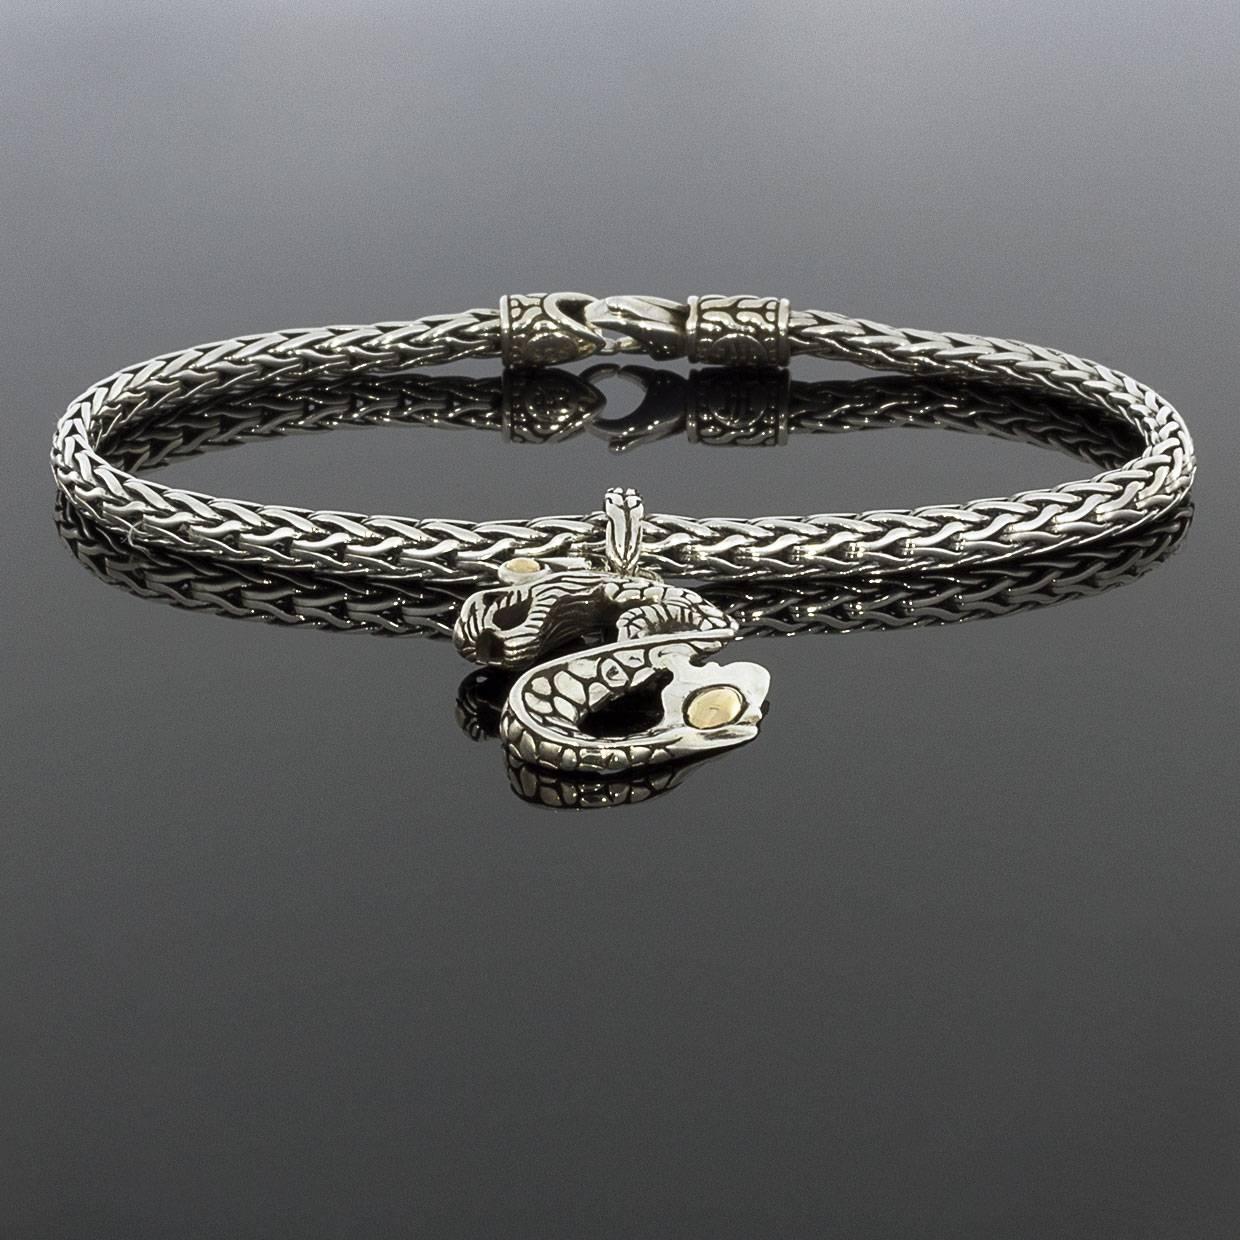 Each piece of John Hardy jewelry has been crafted in Bali since 1975. John Hardy is dedicated to creating timeless one-of-a-kind pieces that are brilliantly alive.

This sterling silver charm bracelet is from John Hardy's Naga Dragon collection. The